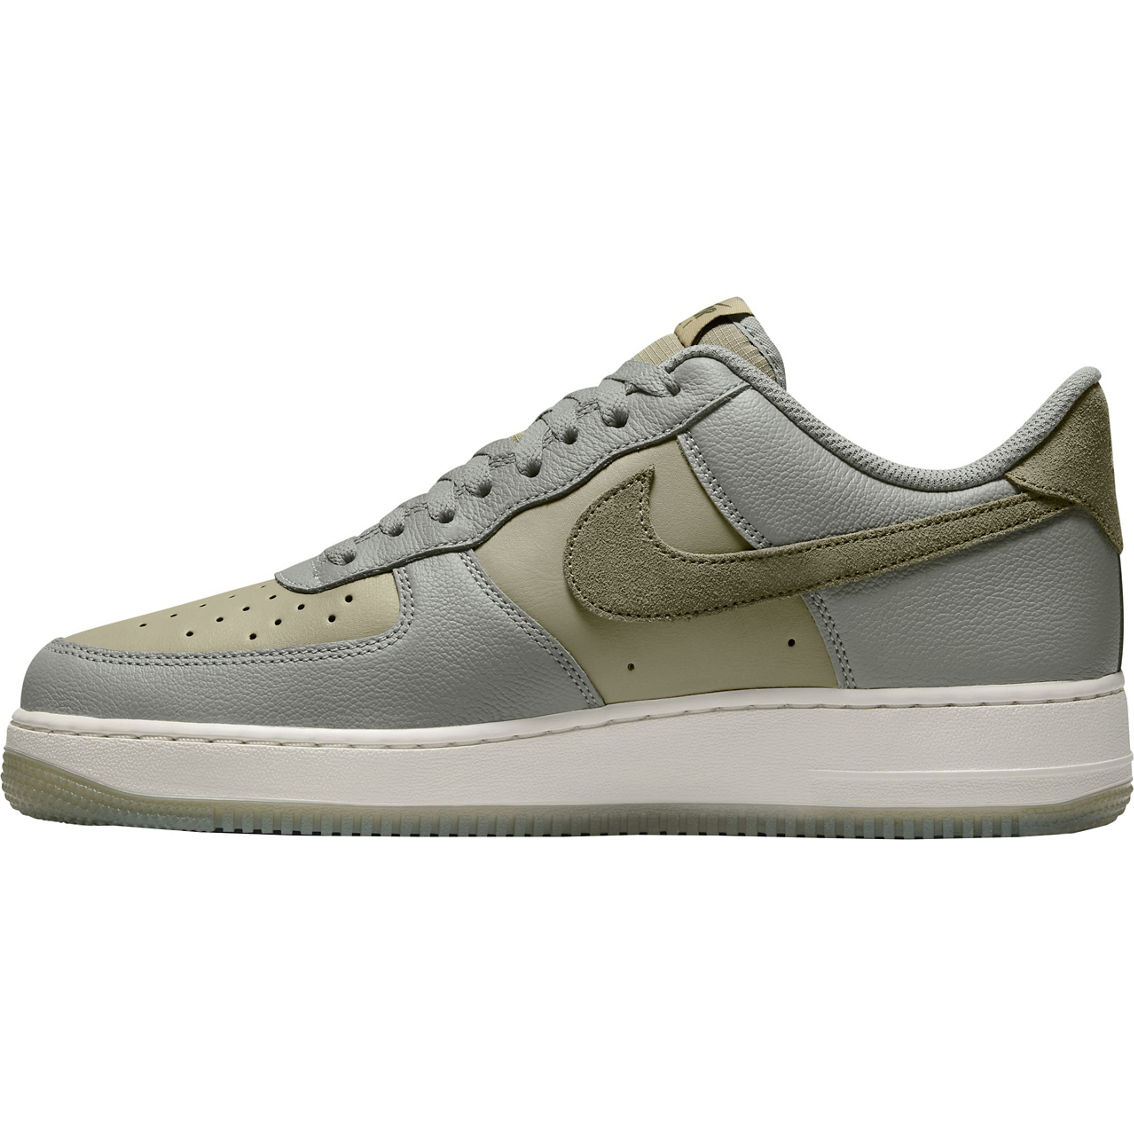 Nike Men's Air Force 1 07 LV8 Shoes - Image 3 of 8